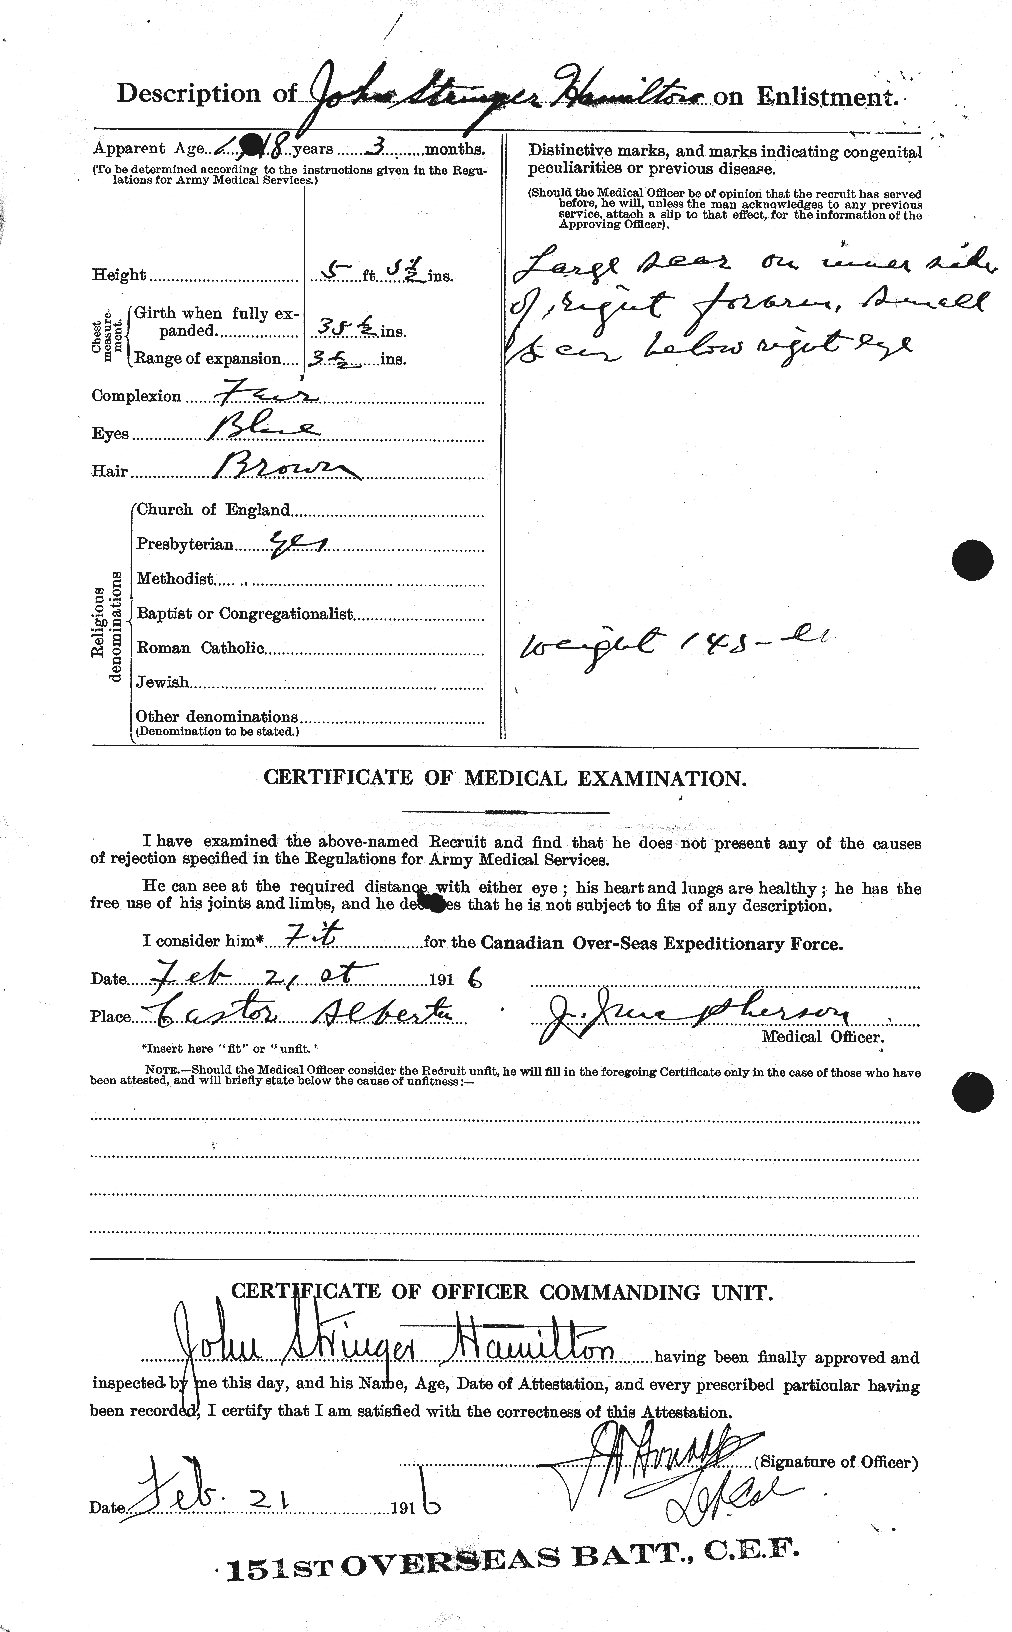 Personnel Records of the First World War - CEF 373125b